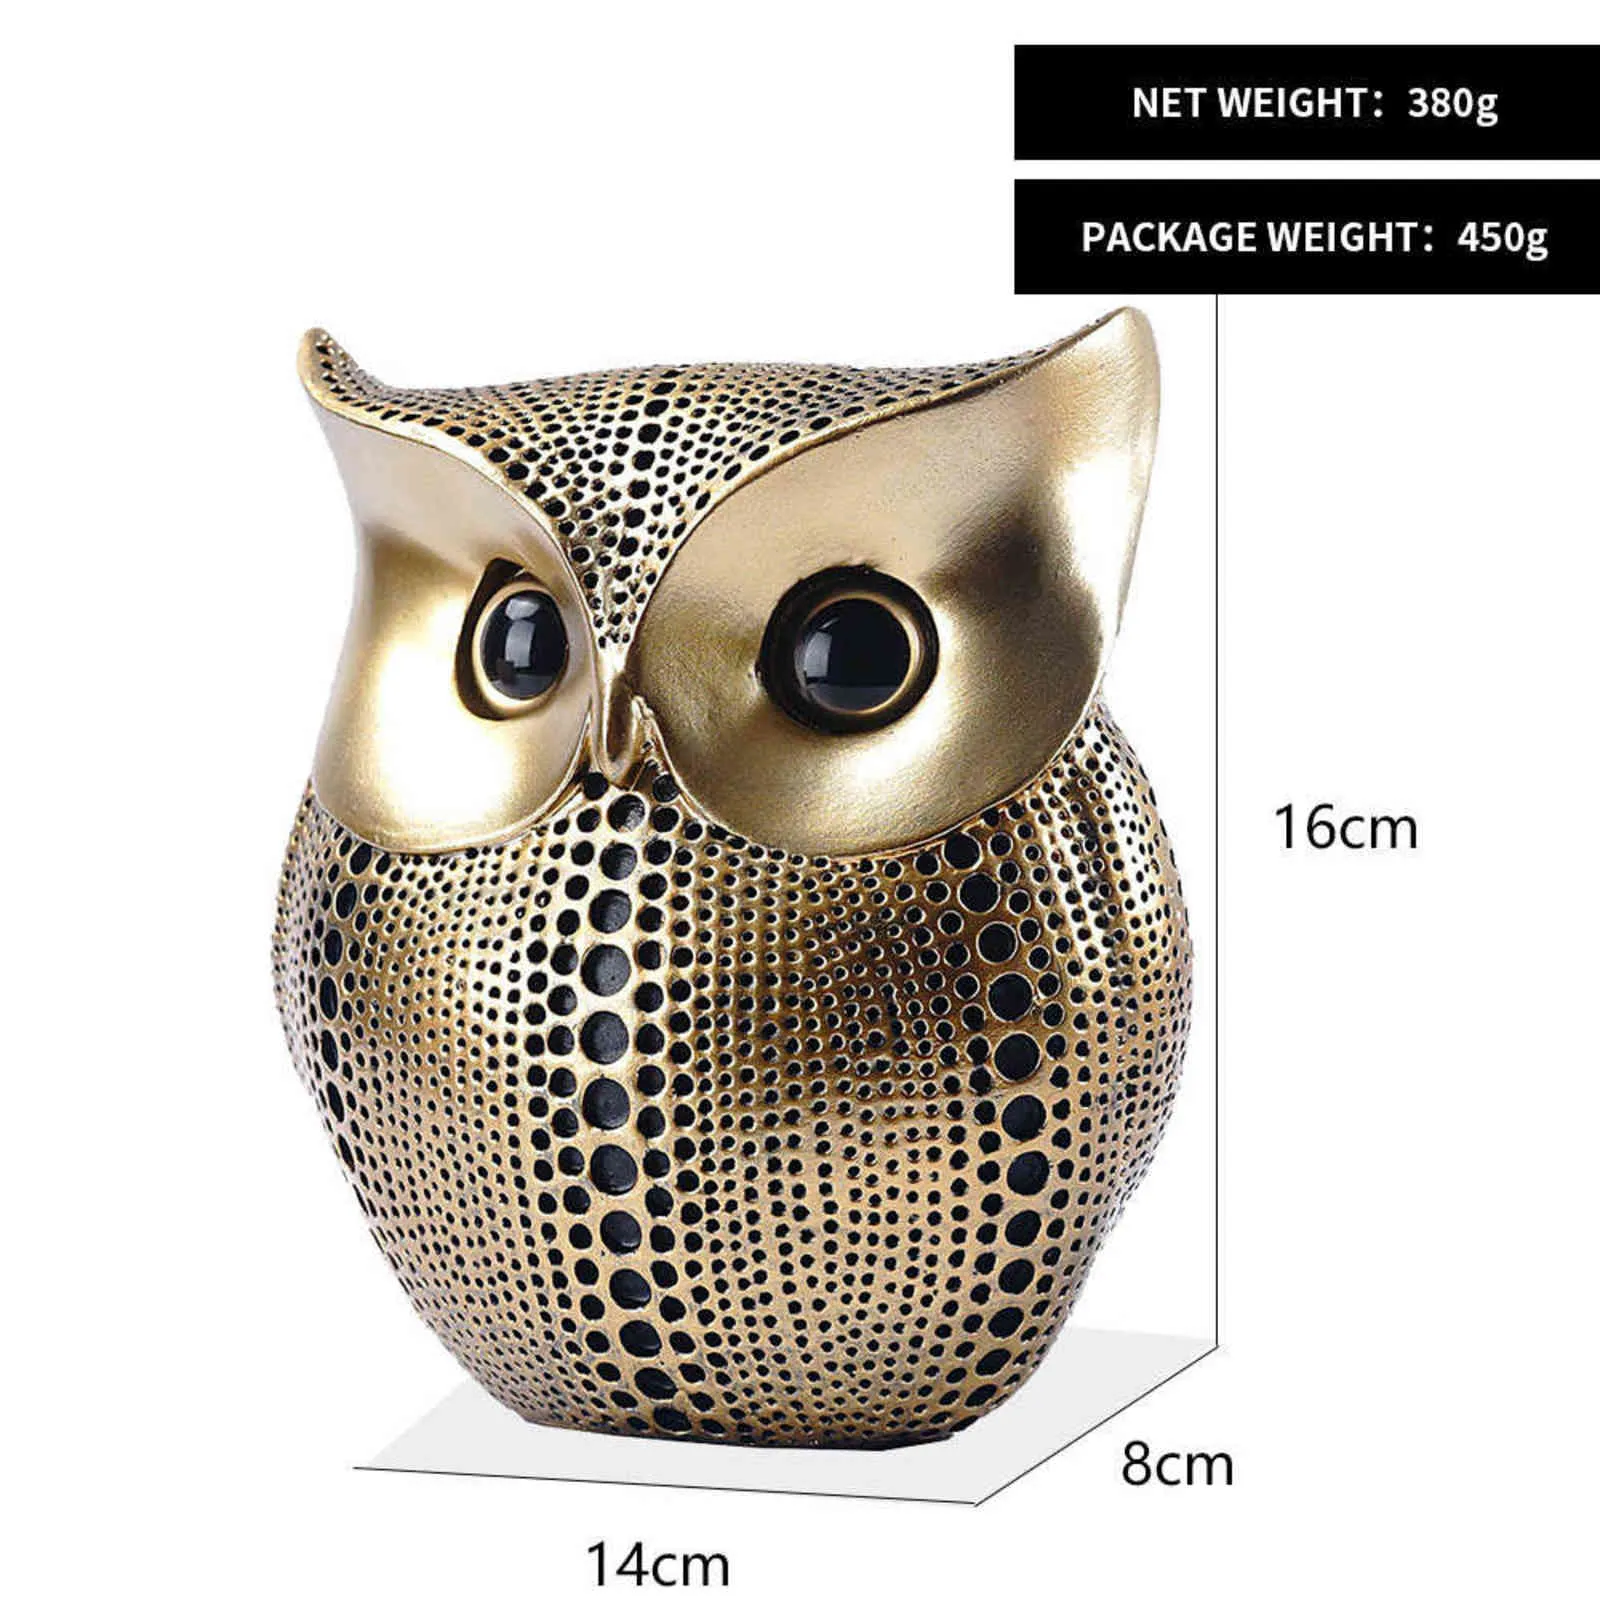 Small Crafted Owl Statue Bundle with Black and White for Home Decor Accents Living Room Bedroom Office Decoration 2111011879515